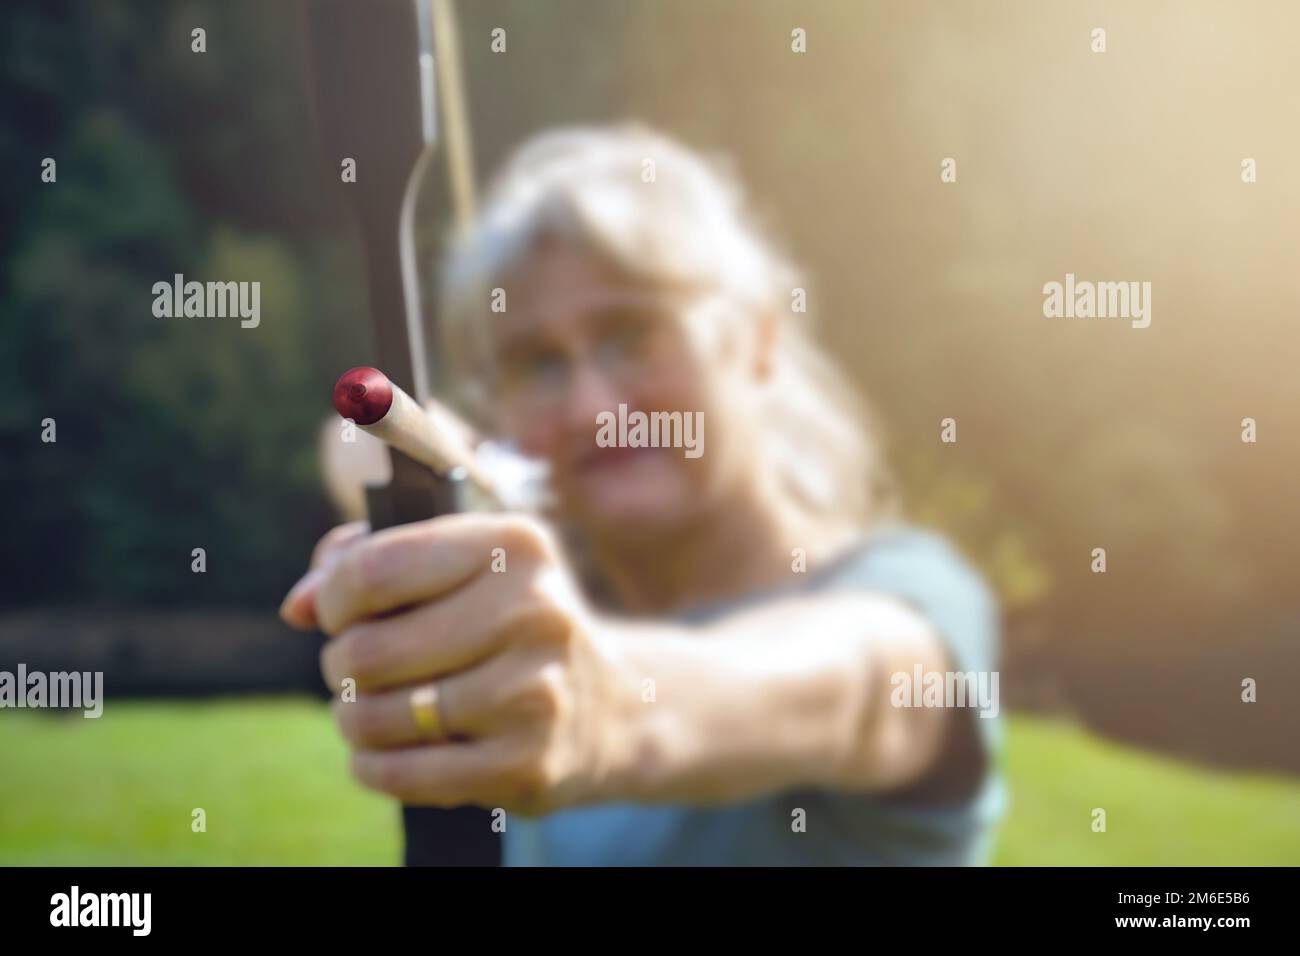 Woman ready to shoot at the target with a bow and arrow Stock Photo